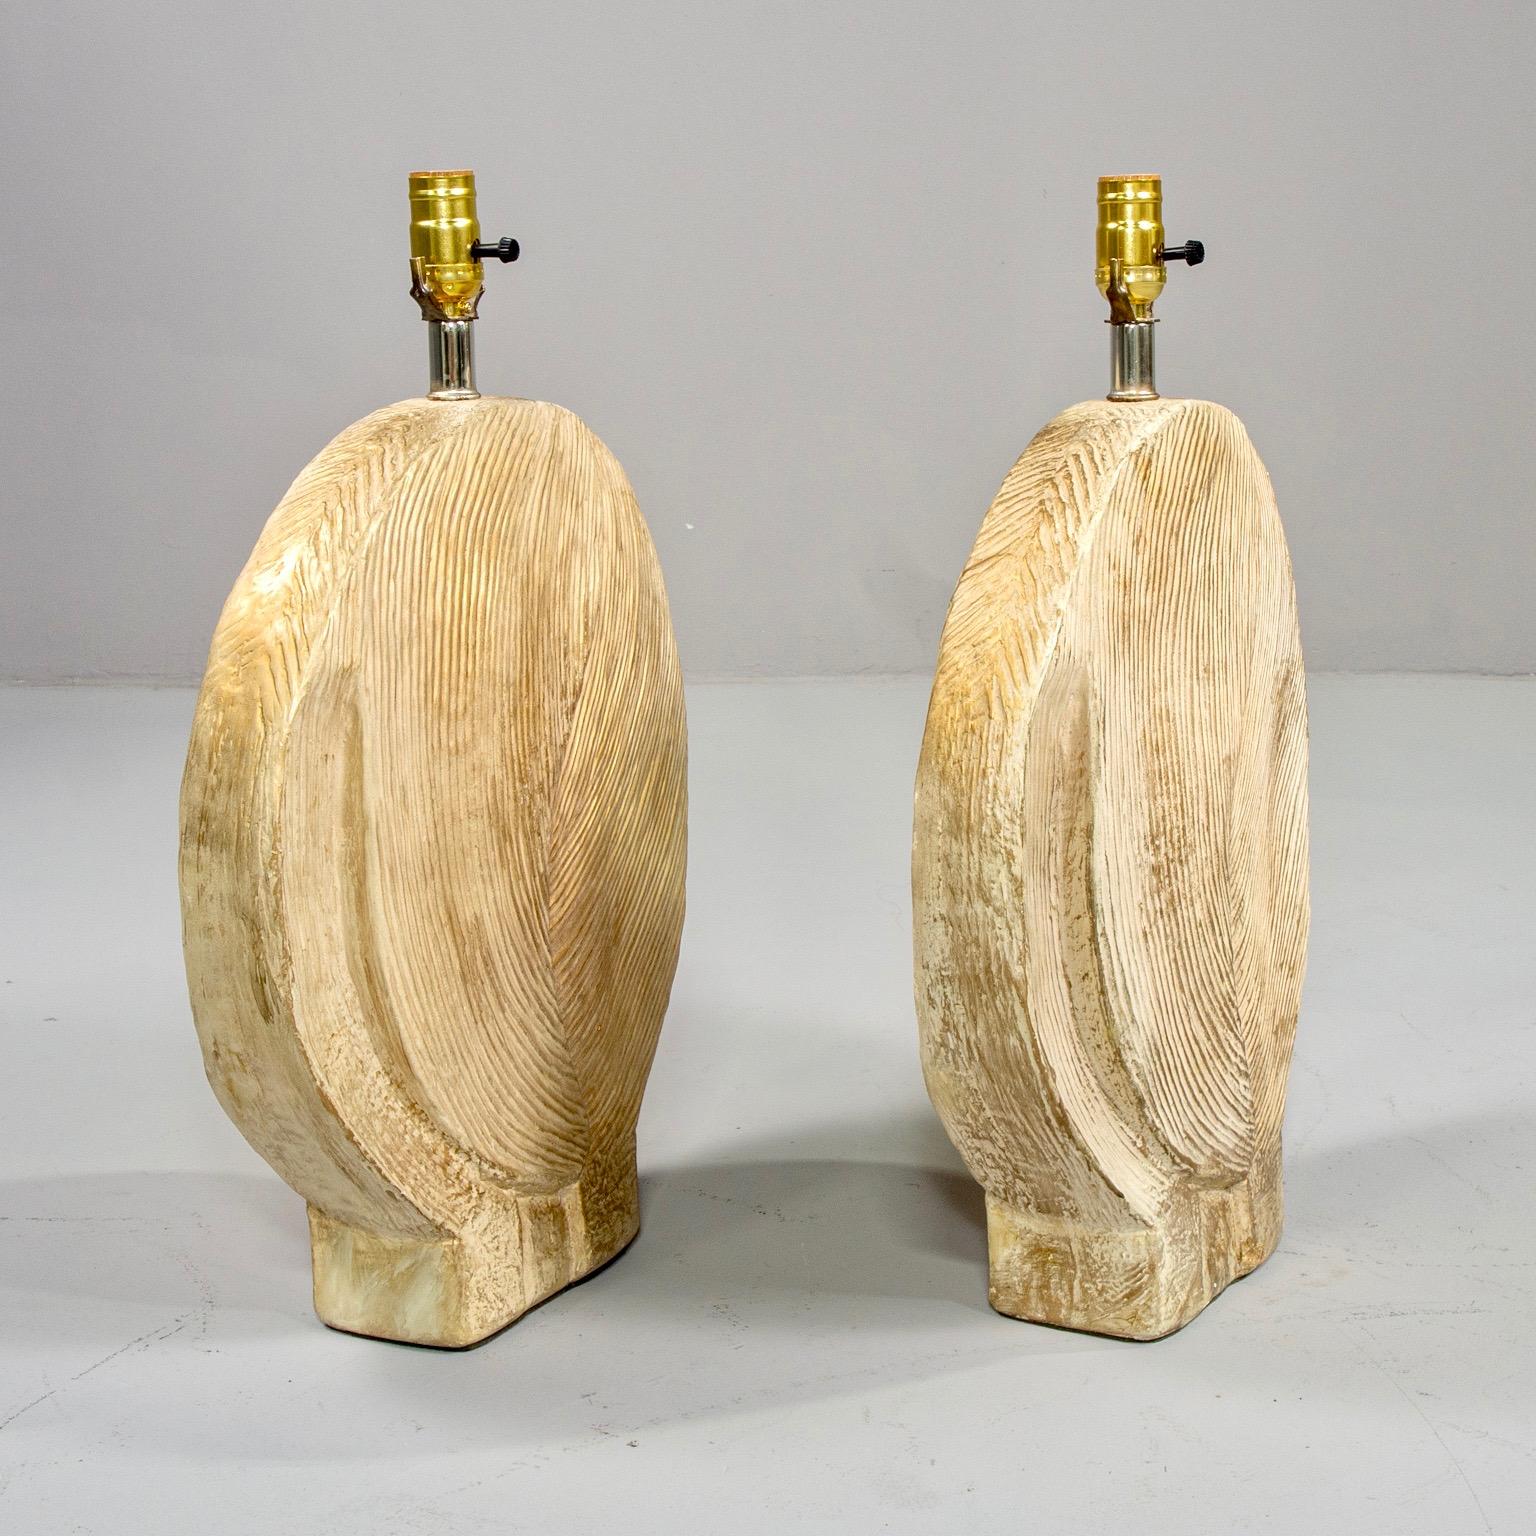 Italian Pair of Clam Shell Form Lamps with Gilded Glaze